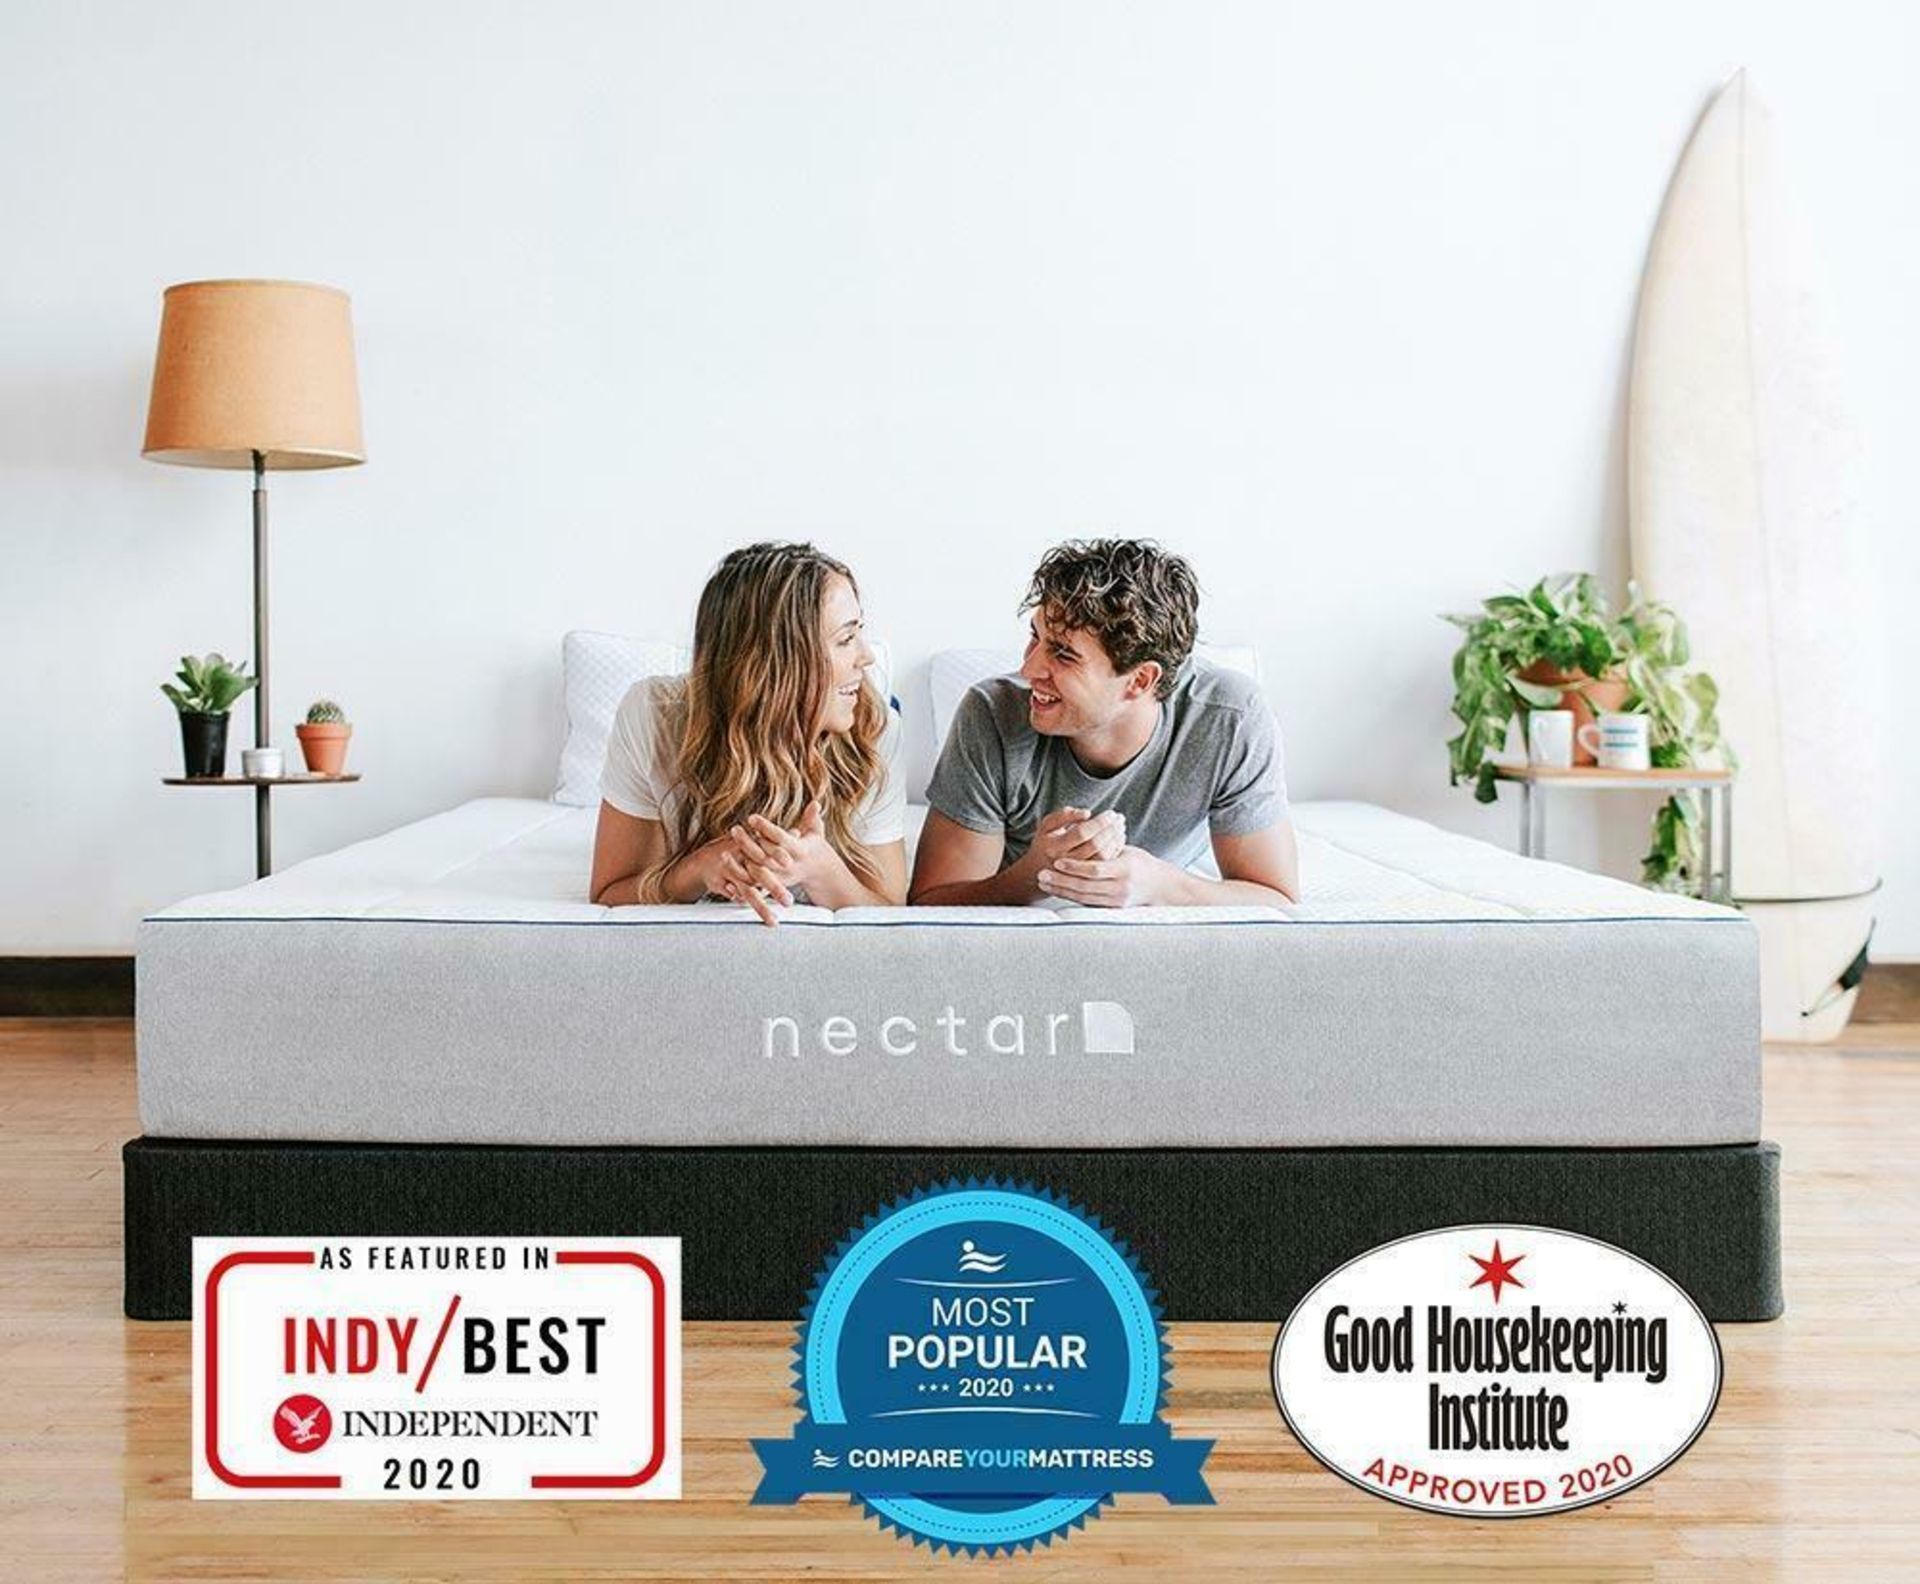 x1|5ft Nectar Professionally Refurbished Smart Pressure Relieving Memory Foam Mattress|RRP £669|